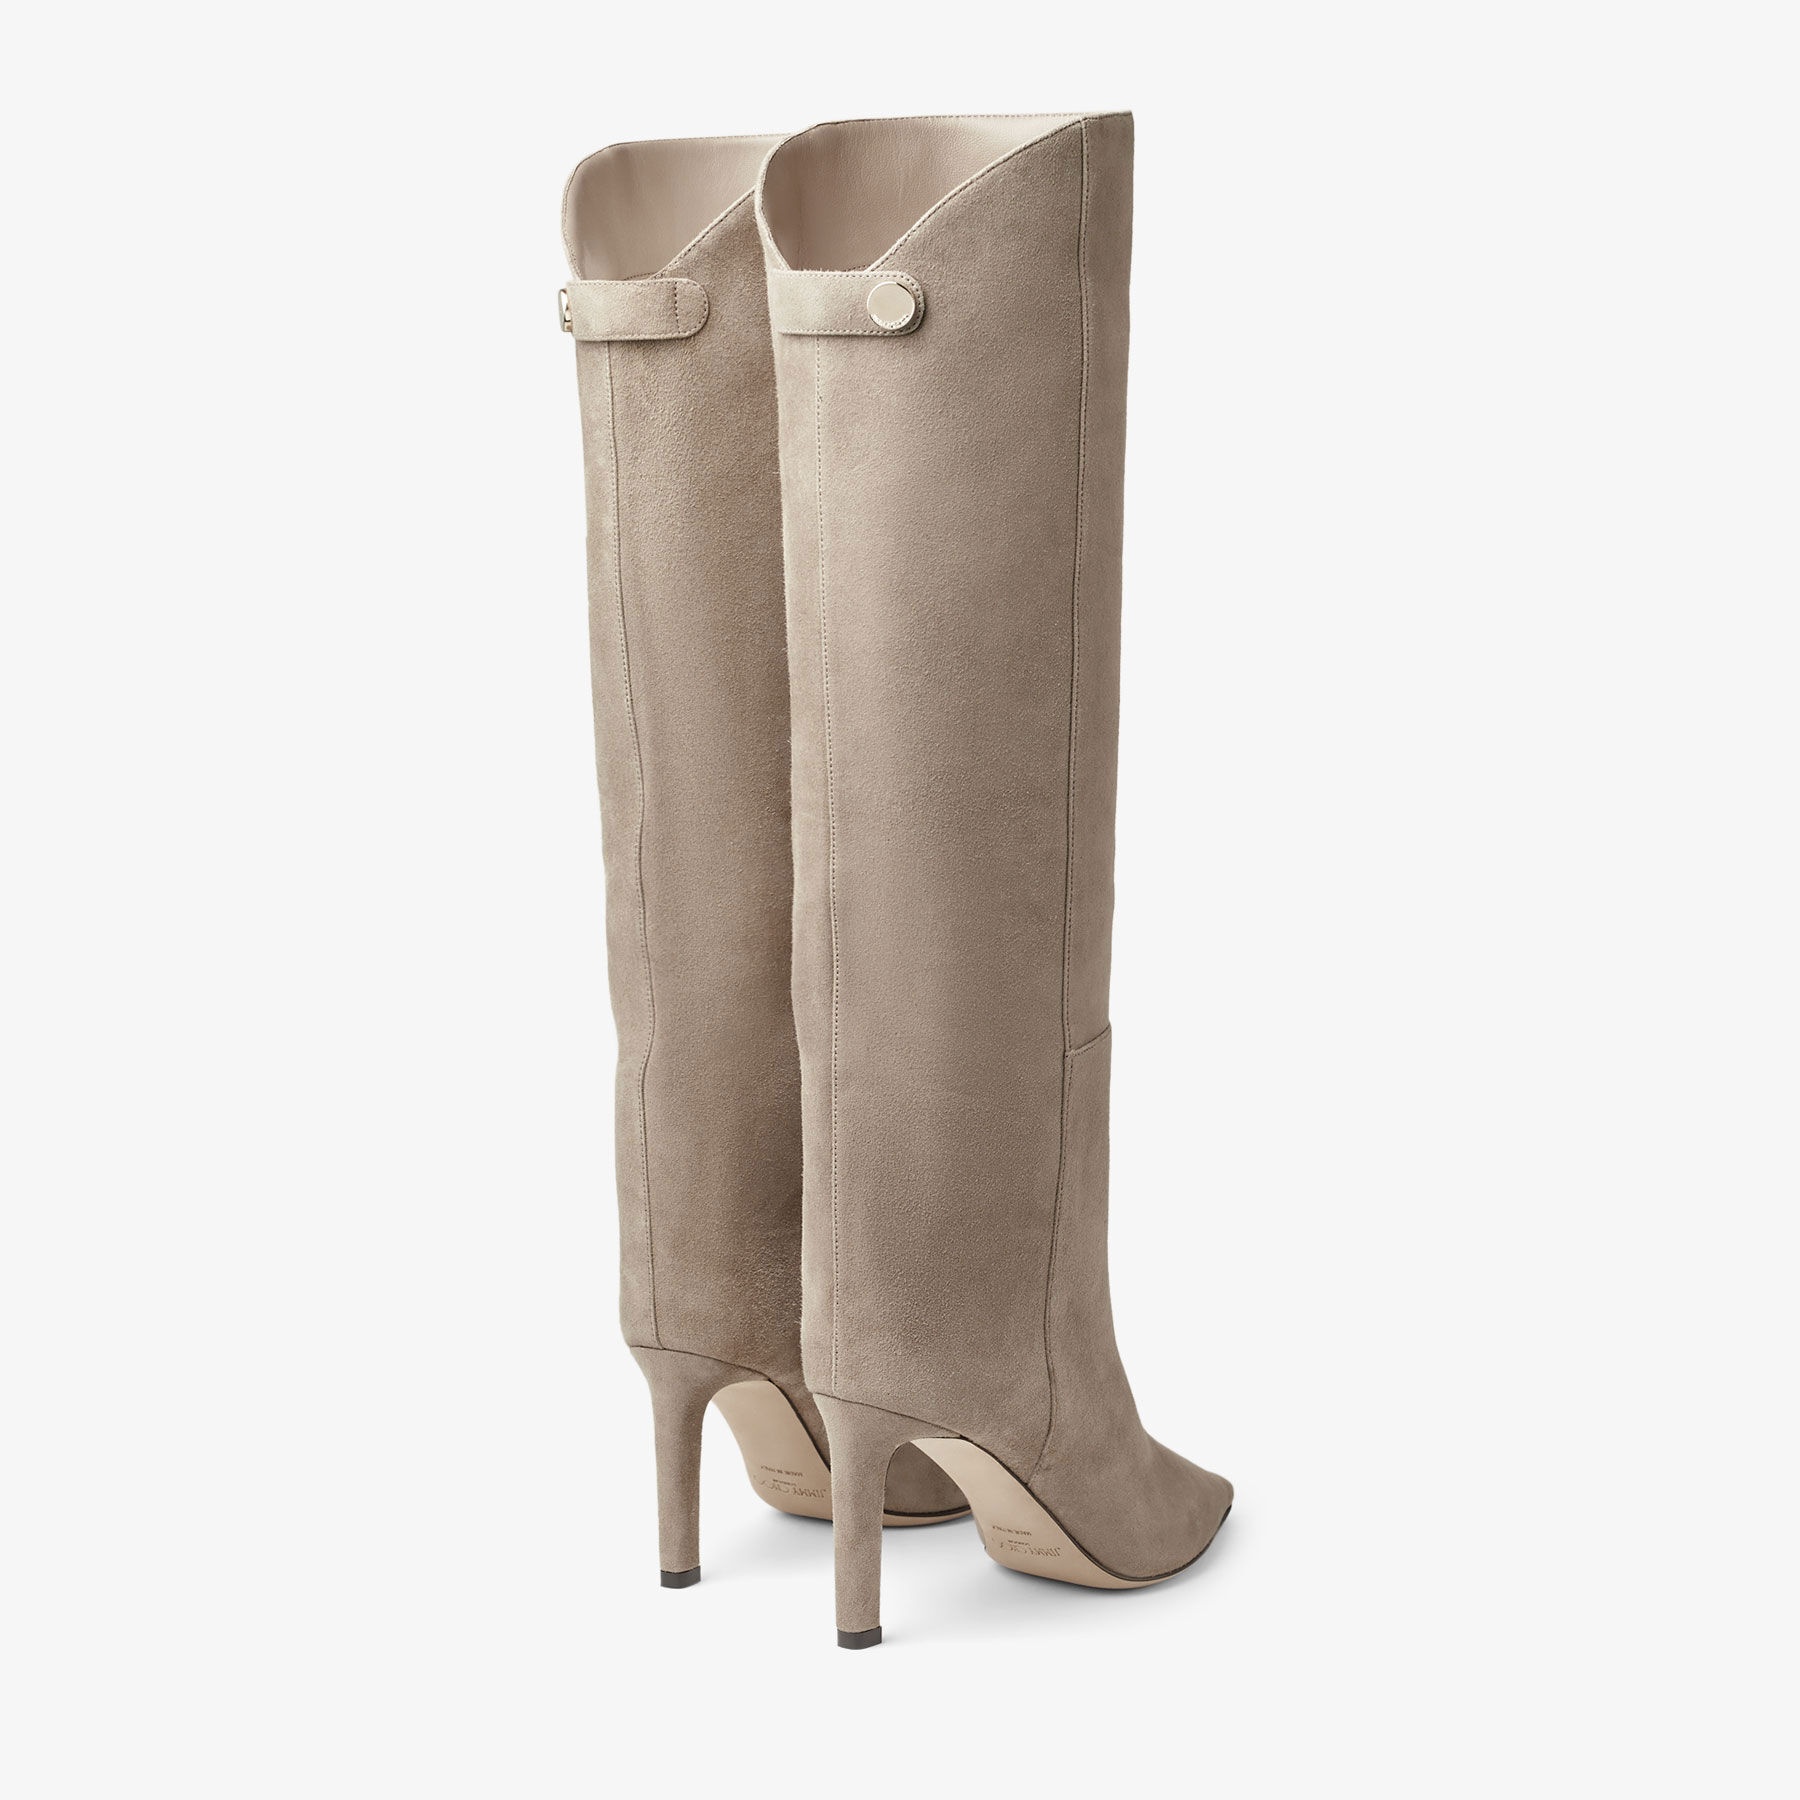 Alizze Knee Boot 85
Taupe Suede Knee-High Boots - 6